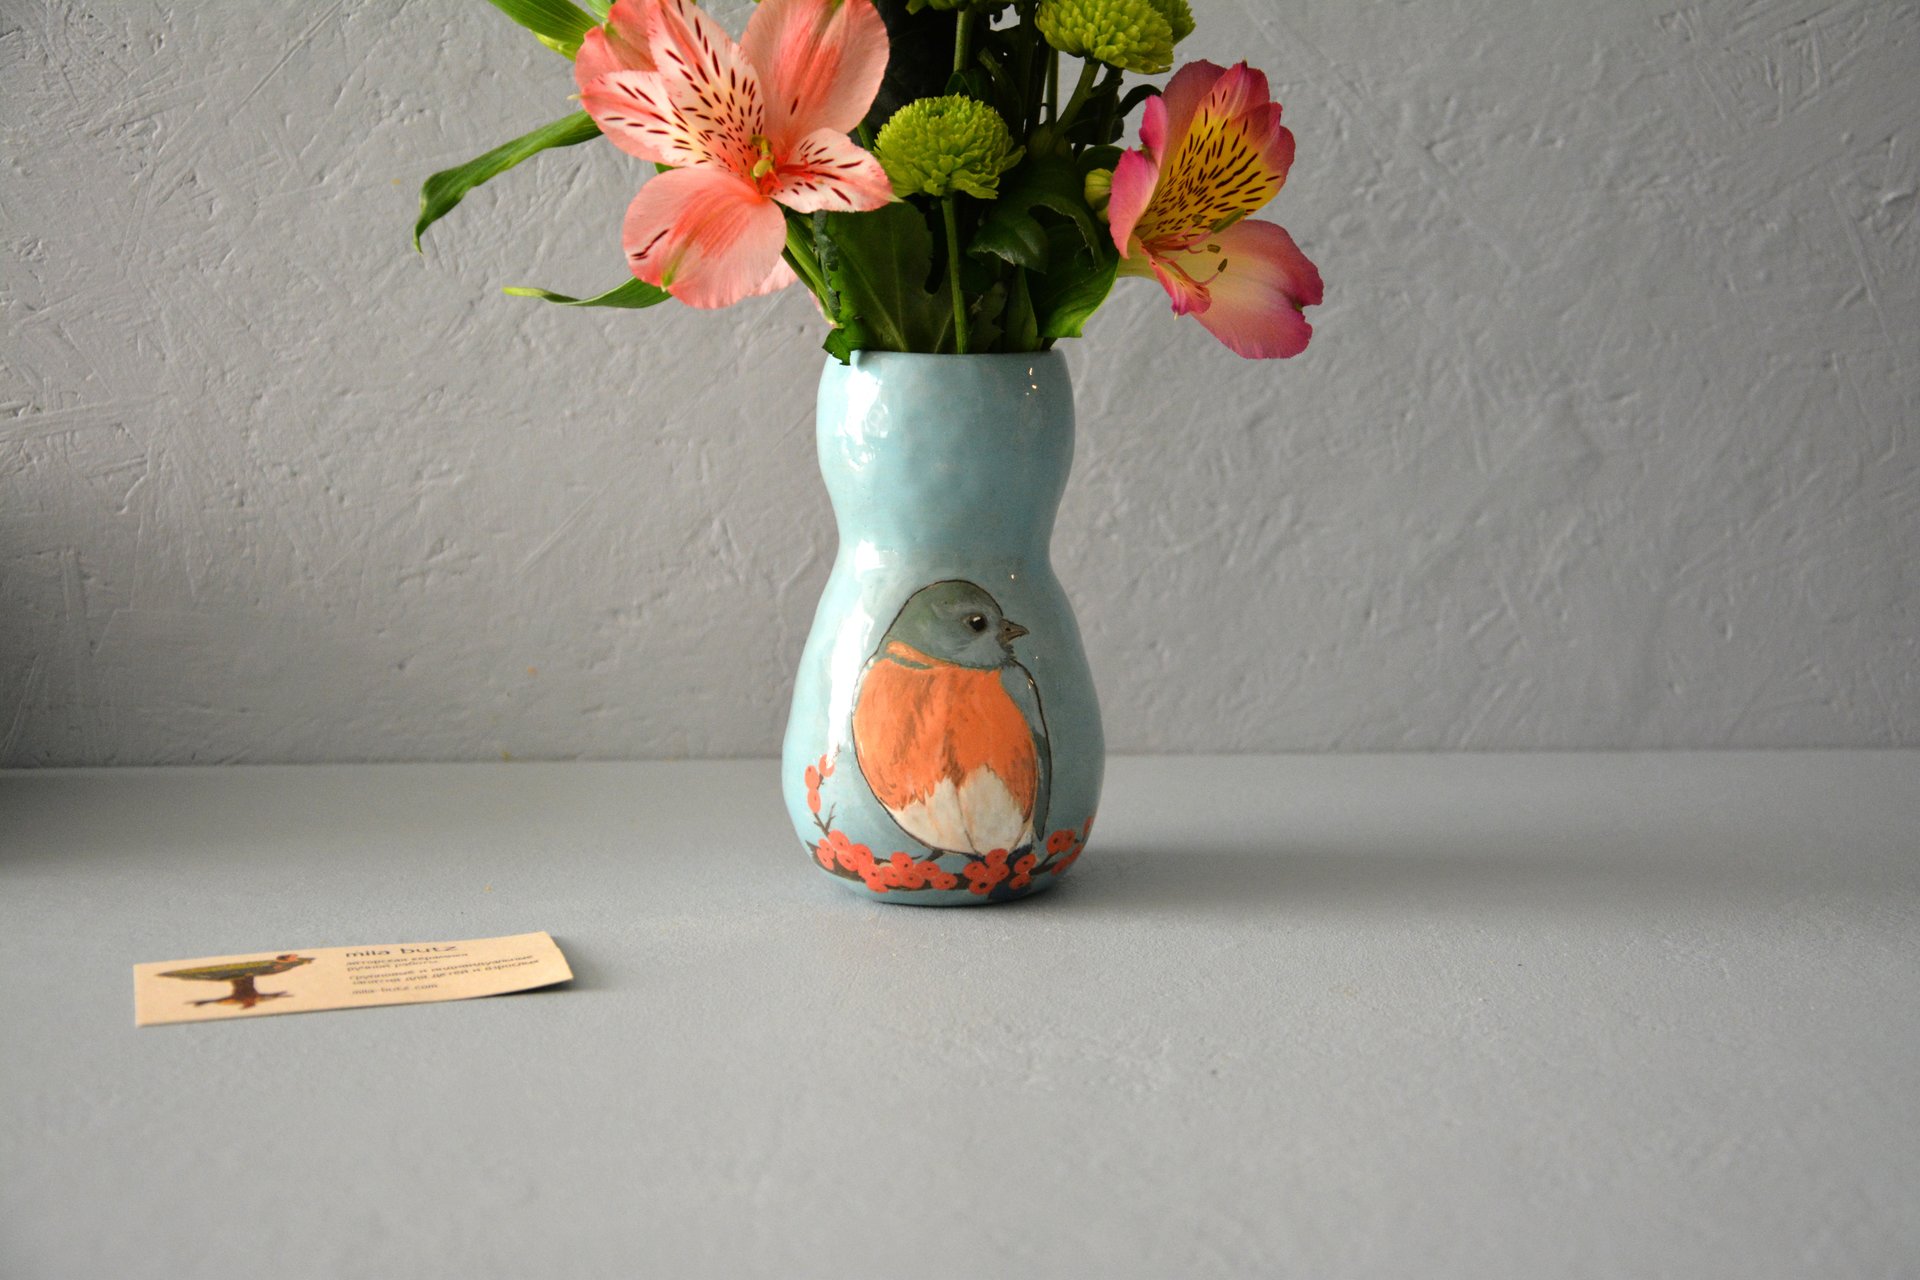 Vase with a picture of Bird Rubecula, height - 13 cm, photo 3 of 4. 590.